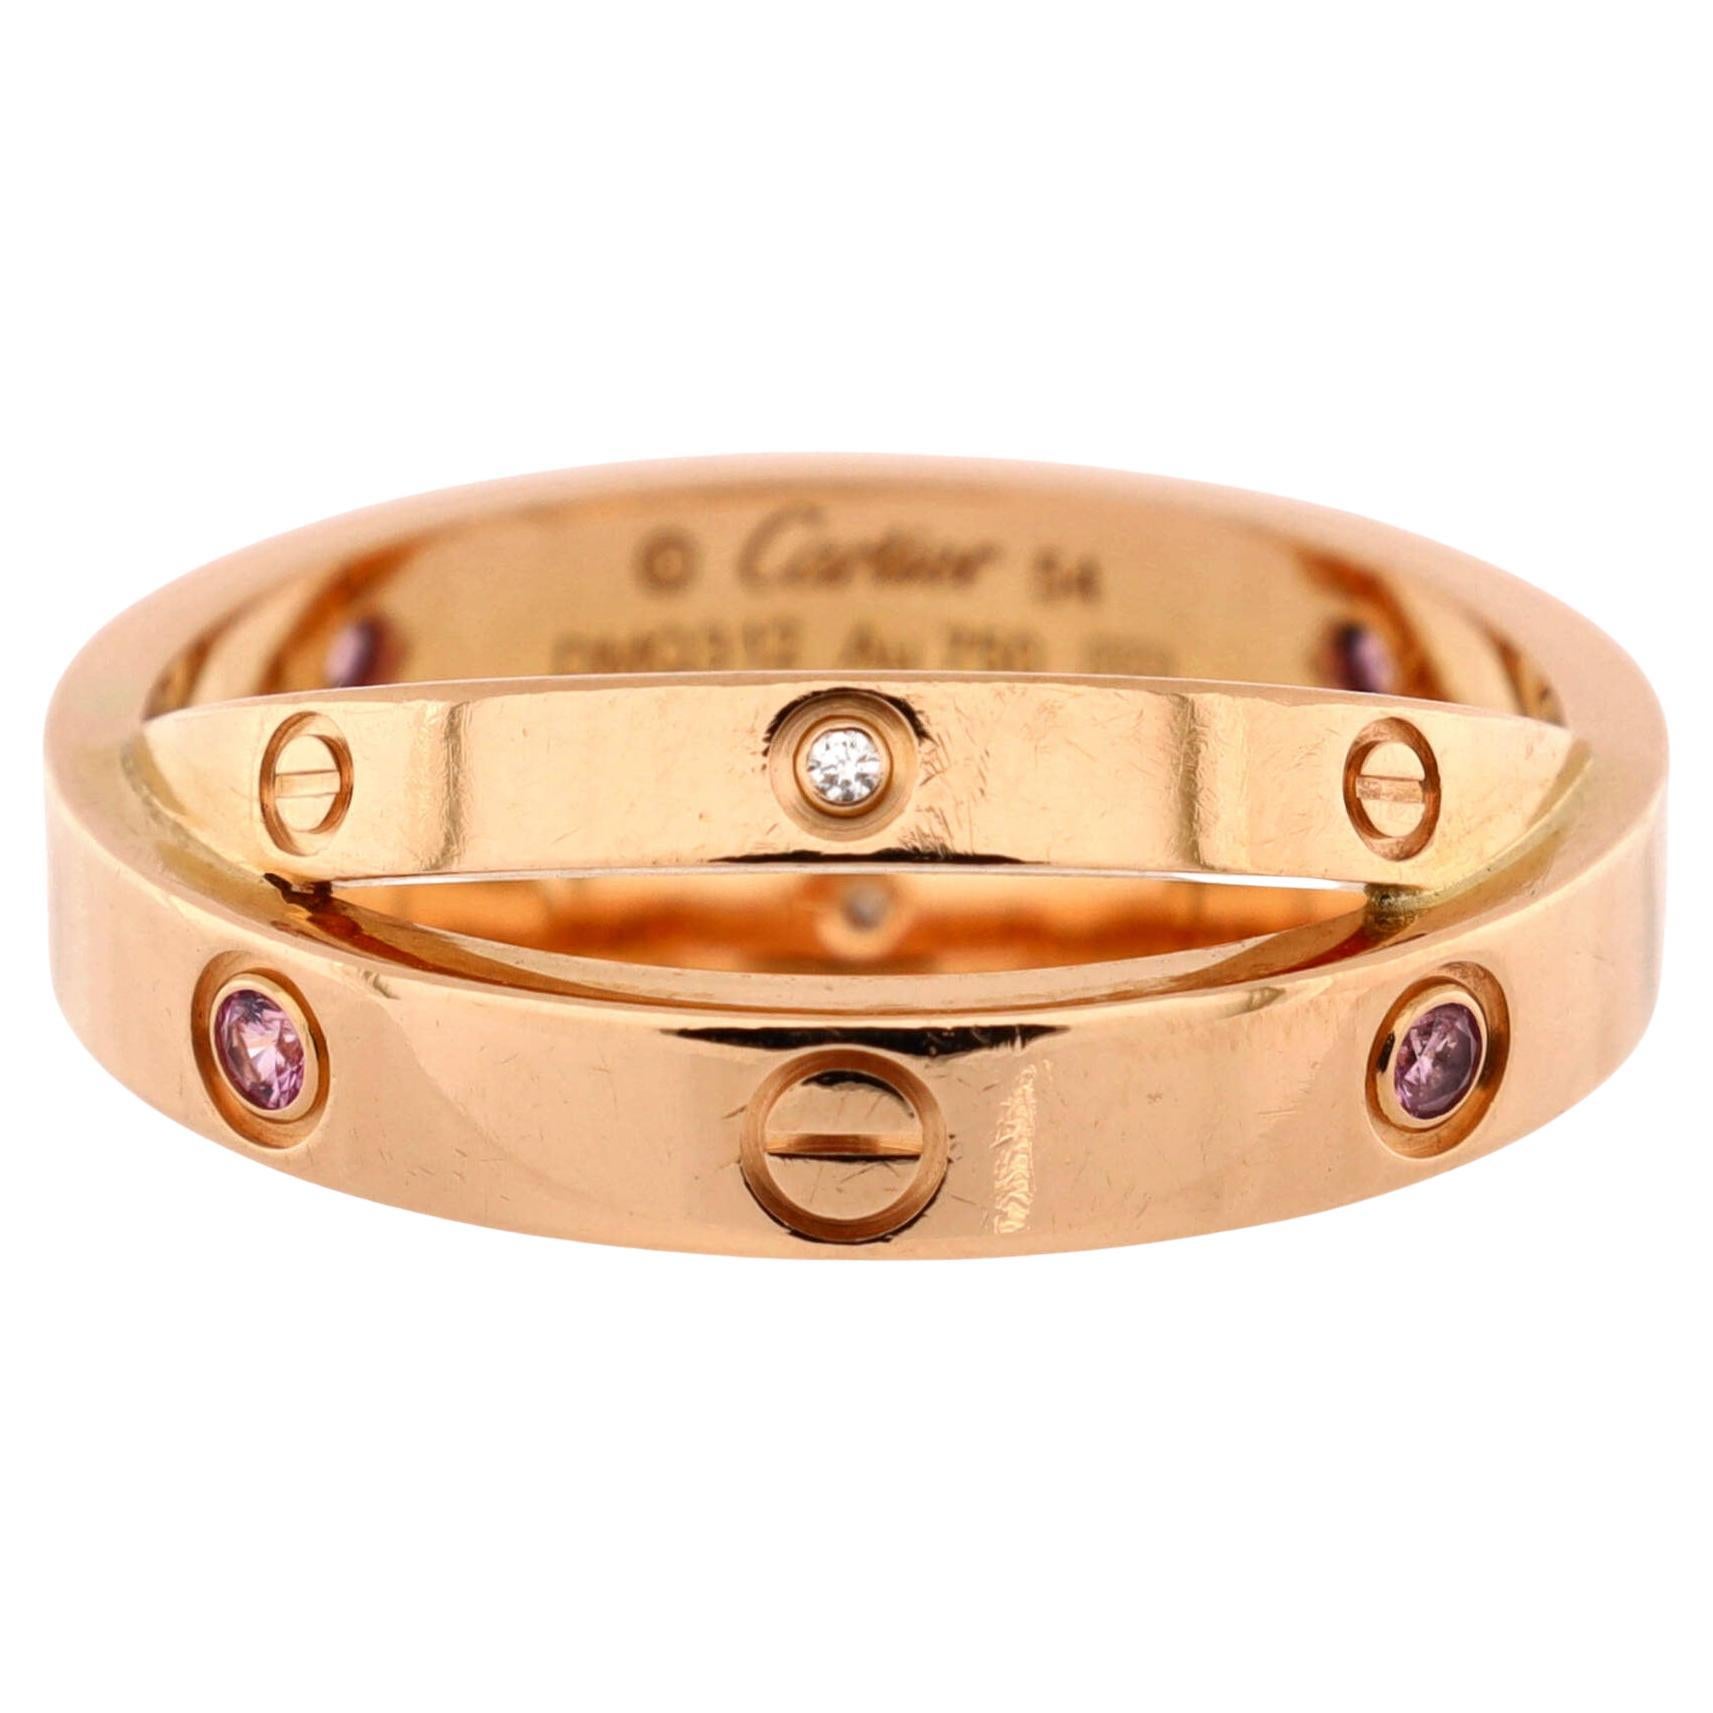 Cartier Love Double Ring 18K Rose Gold with Pink Sapphires and Diamonds